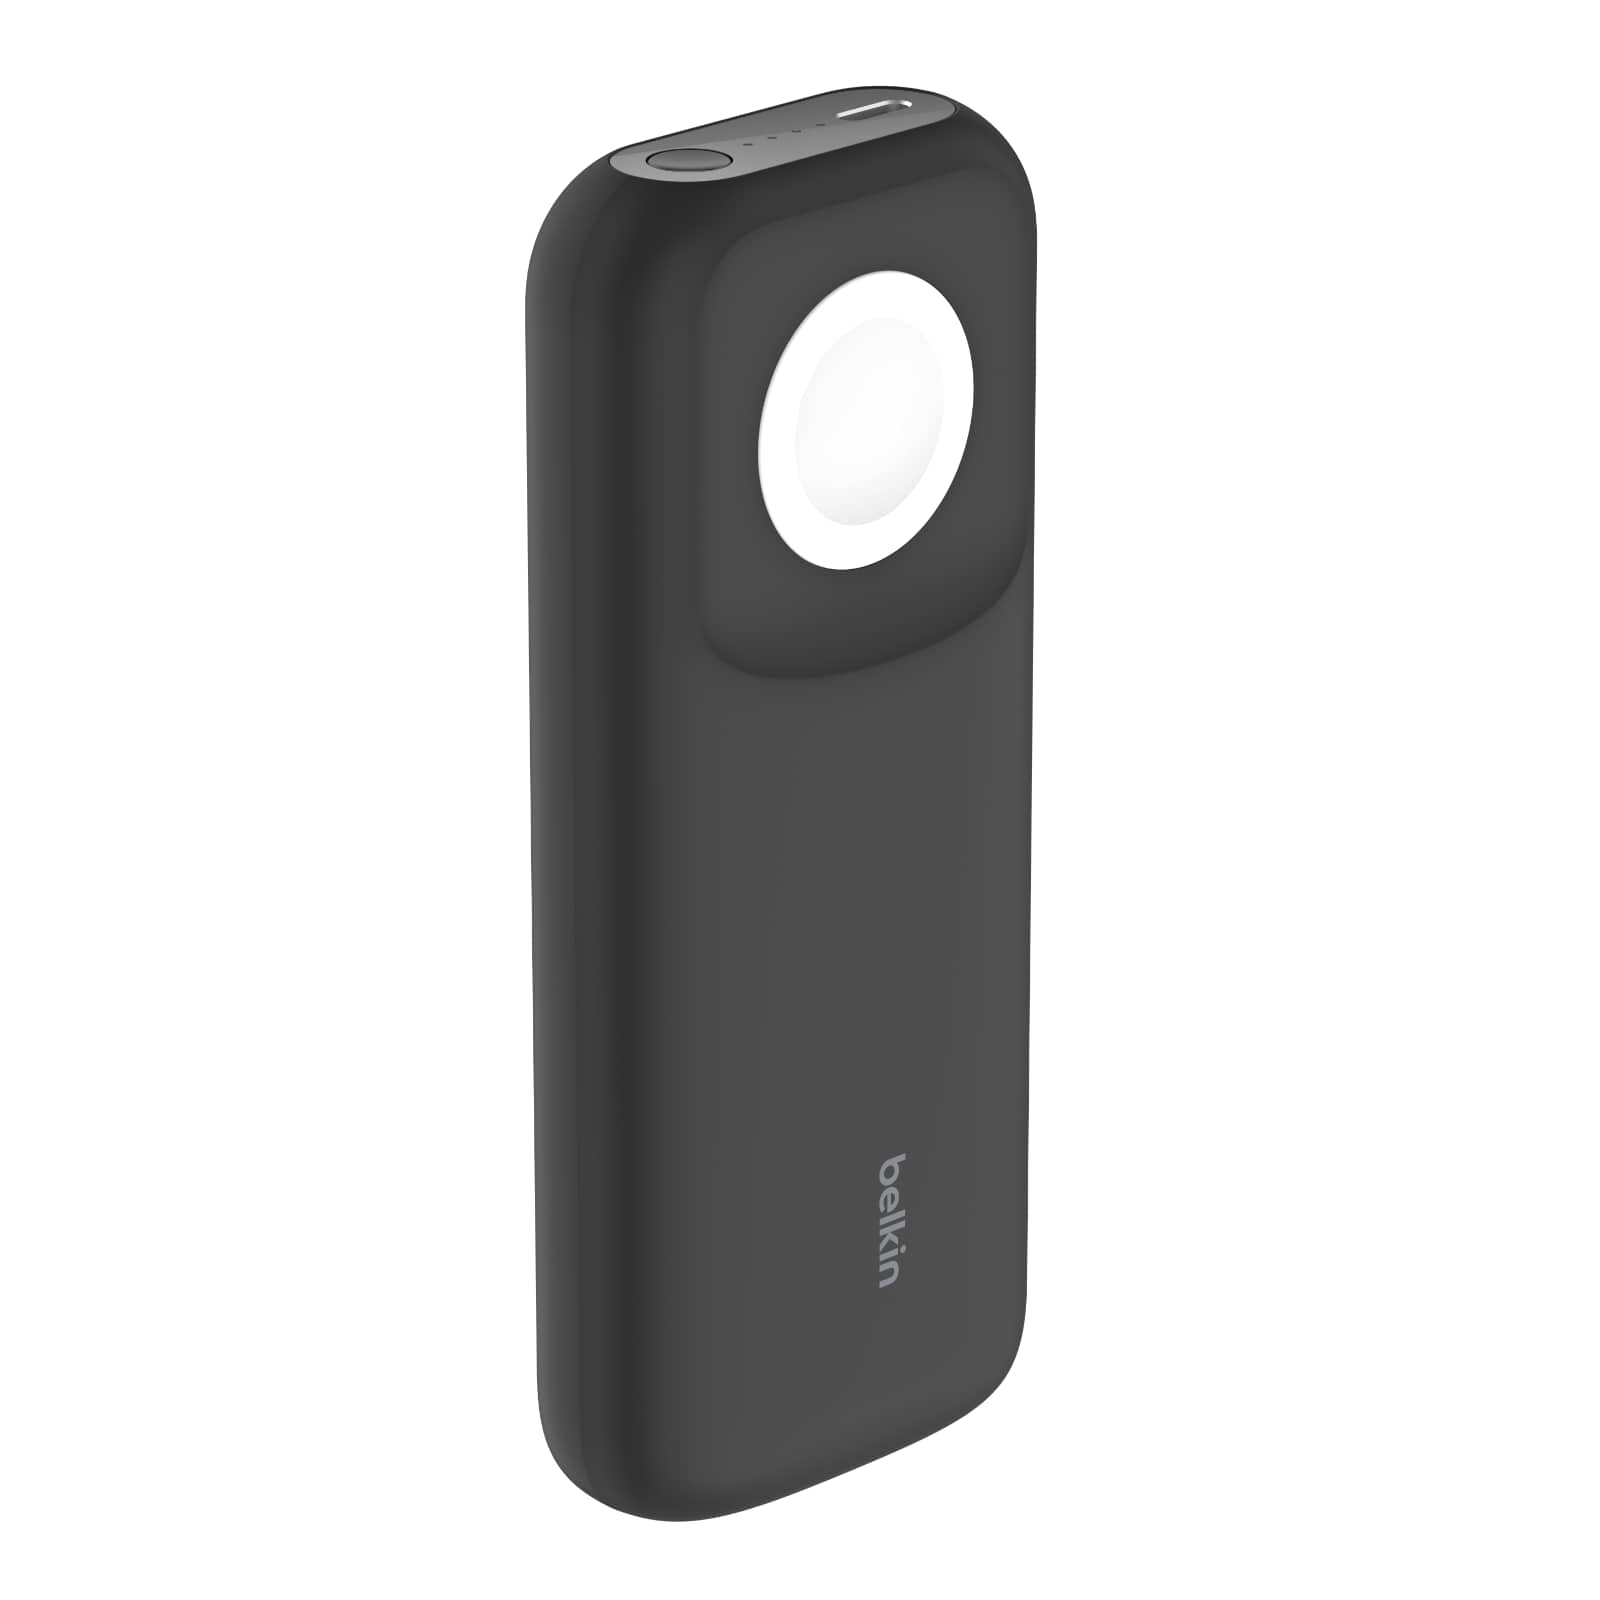 Belkin's latest power bank set to charge phone, watch on the go – Pickr